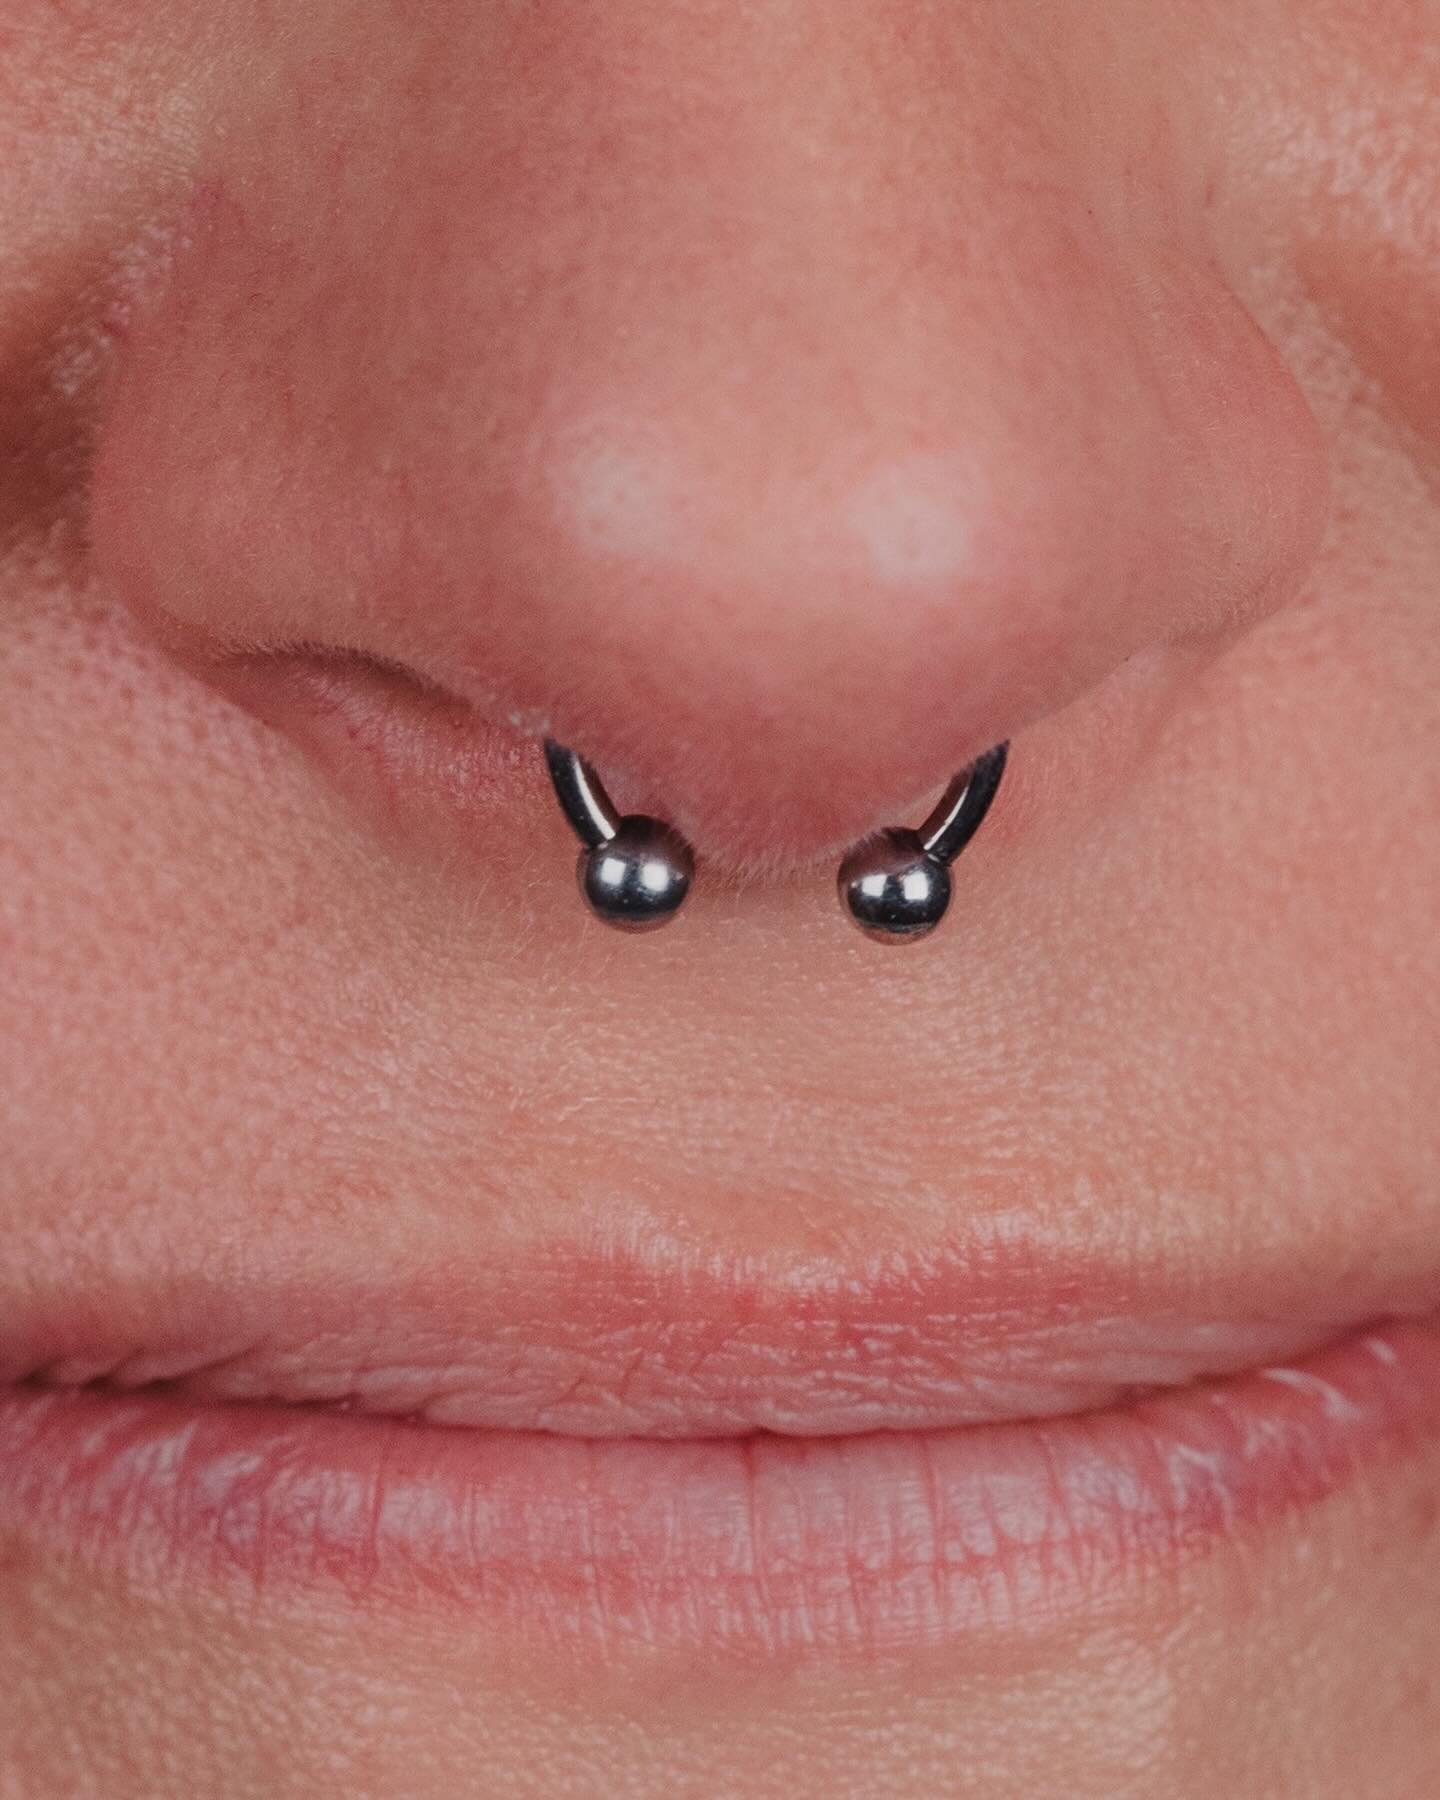 FOR ALL🔥
 
TOO SEE
 
A sweet little classic septum for Reita, performed by Tanner😎
⠀⠀⠀⠀⠀⠀⠀⠀⠀
~  @research.chemicals ~ 
⠀⠀⠀⠀⠀⠀⠀⠀⠀
~  @industrialstrength ~
⠀⠀⠀⠀⠀⠀⠀⠀⠀
⠀⠀⠀⠀⠀⠀⠀⠀⠀
⠀⠀⠀⠀⠀⠀⠀⠀⠀
📸@mrbattle
~book your appointment🖋
~link in bio
&bull;
&bull;
